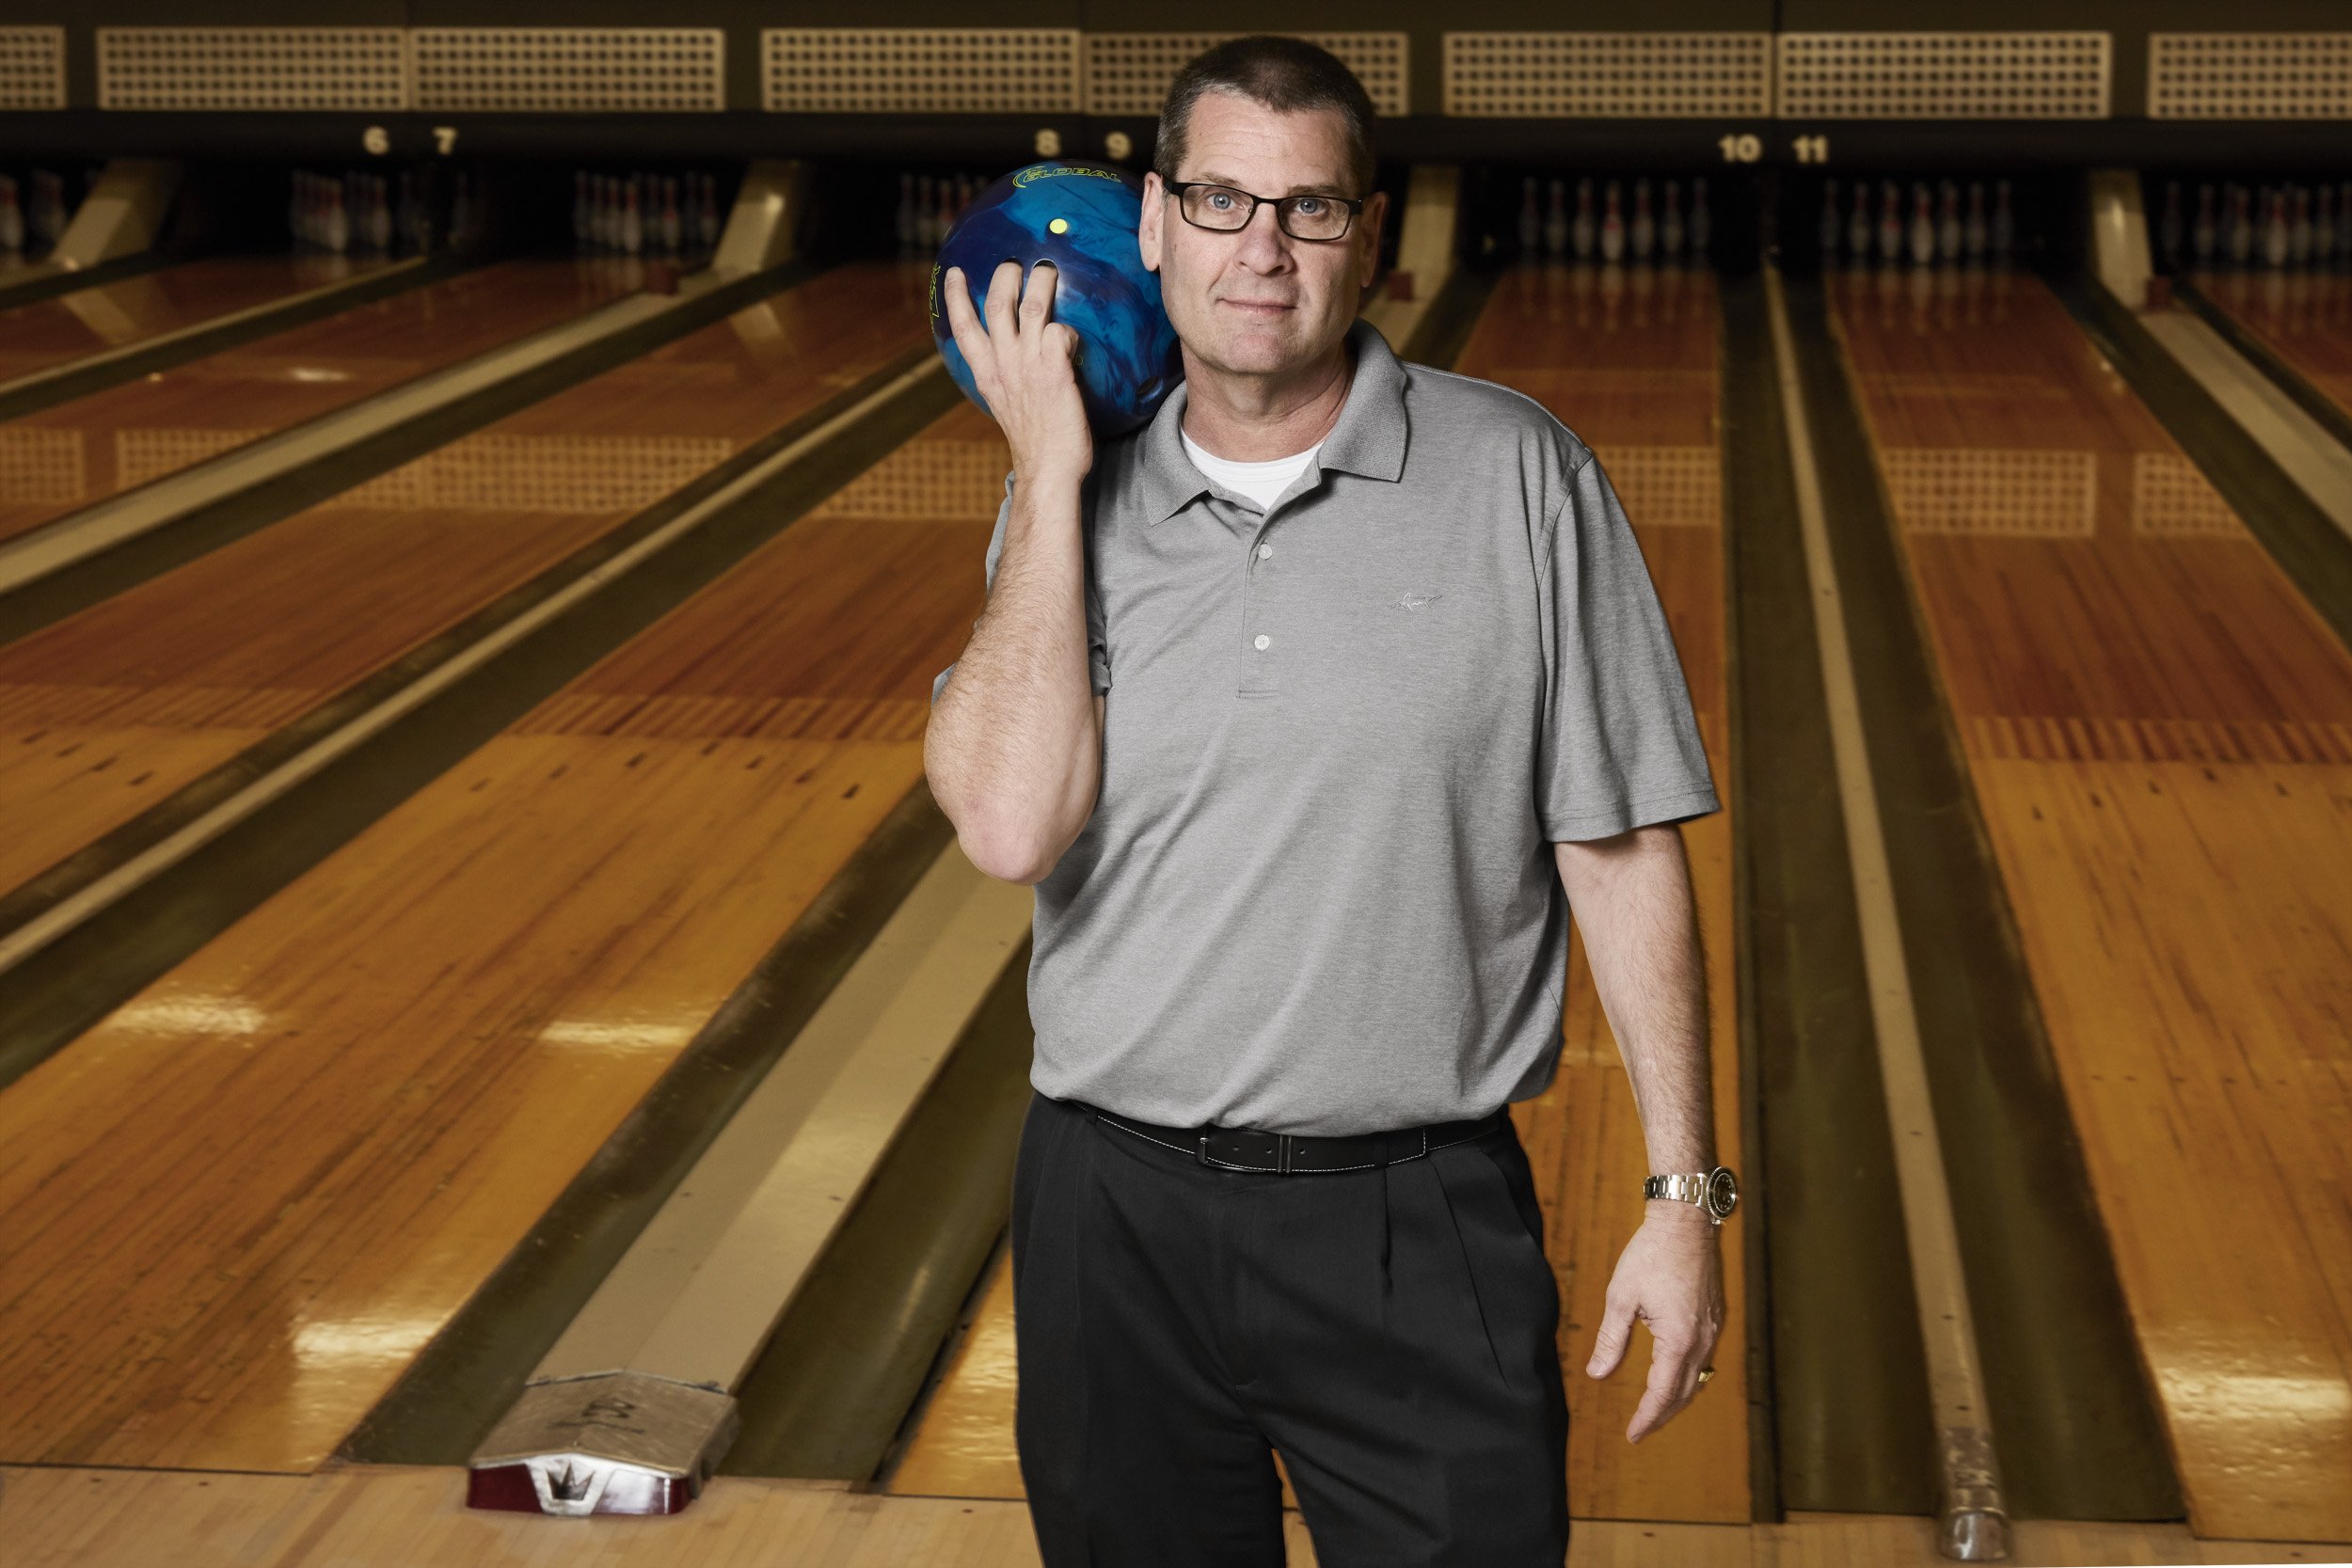 man holding bowling ball with bowling alley behind him